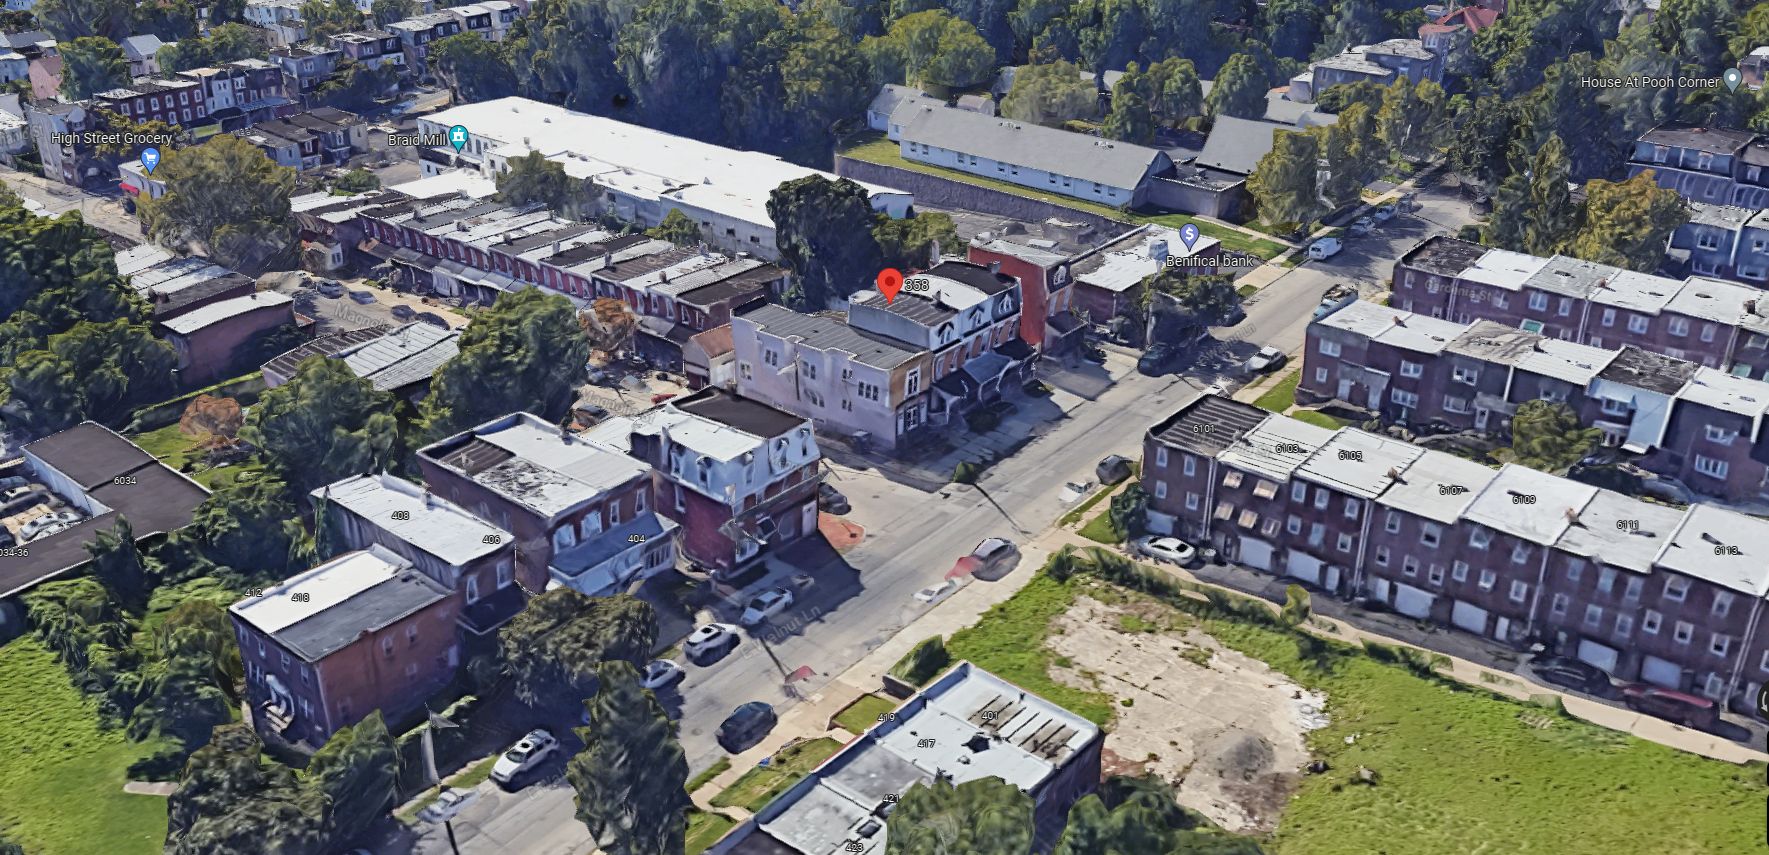 358 East Walnut Lane. Site map, prior to redevelopment. Aerial view. Looking south. Credit: Google Maps